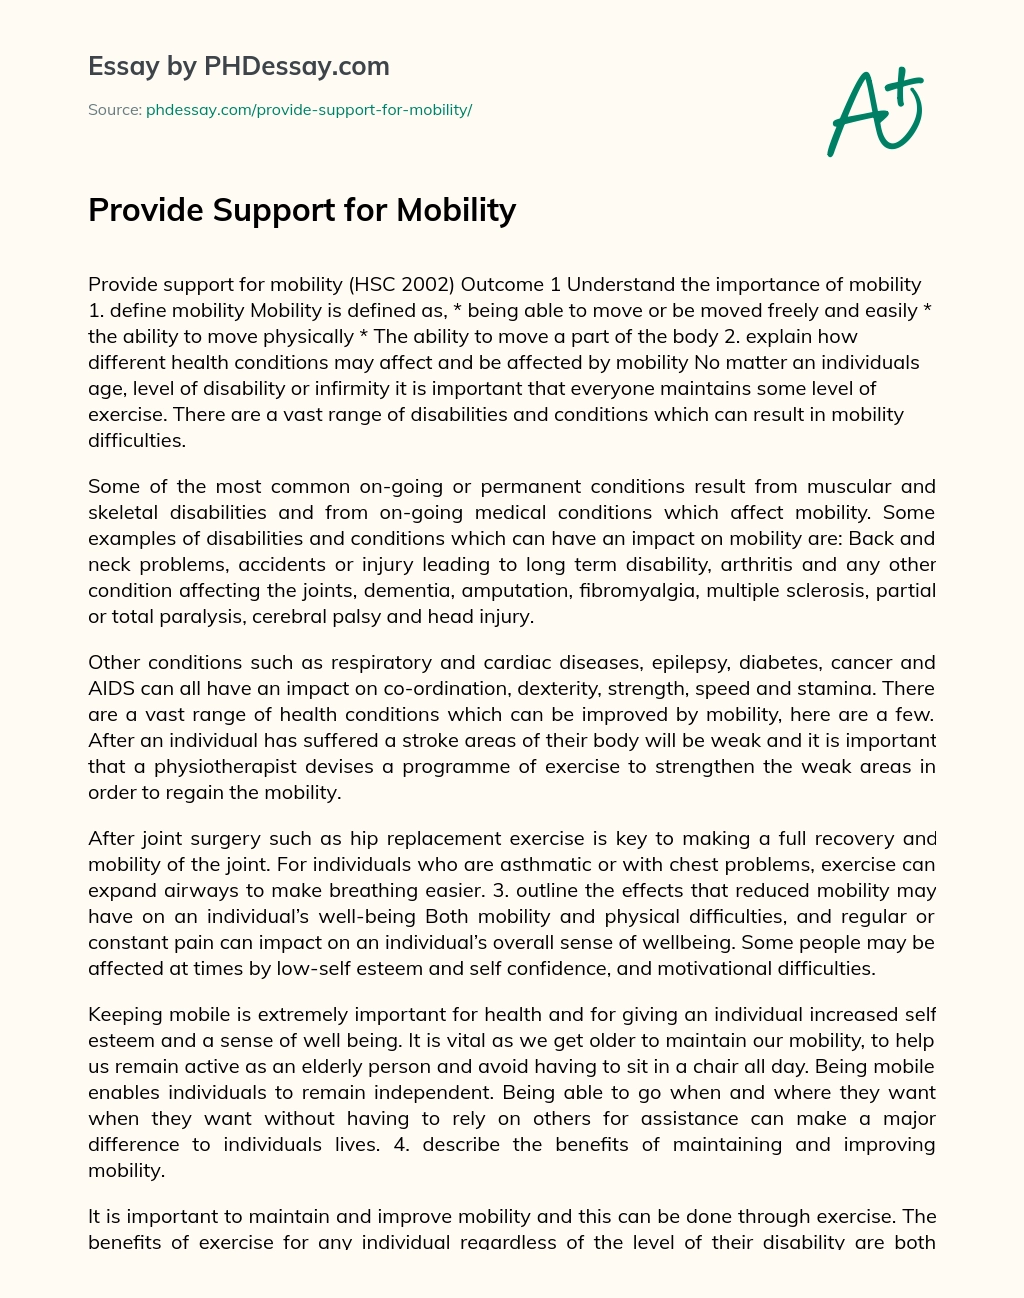 Provide Support for Mobility essay